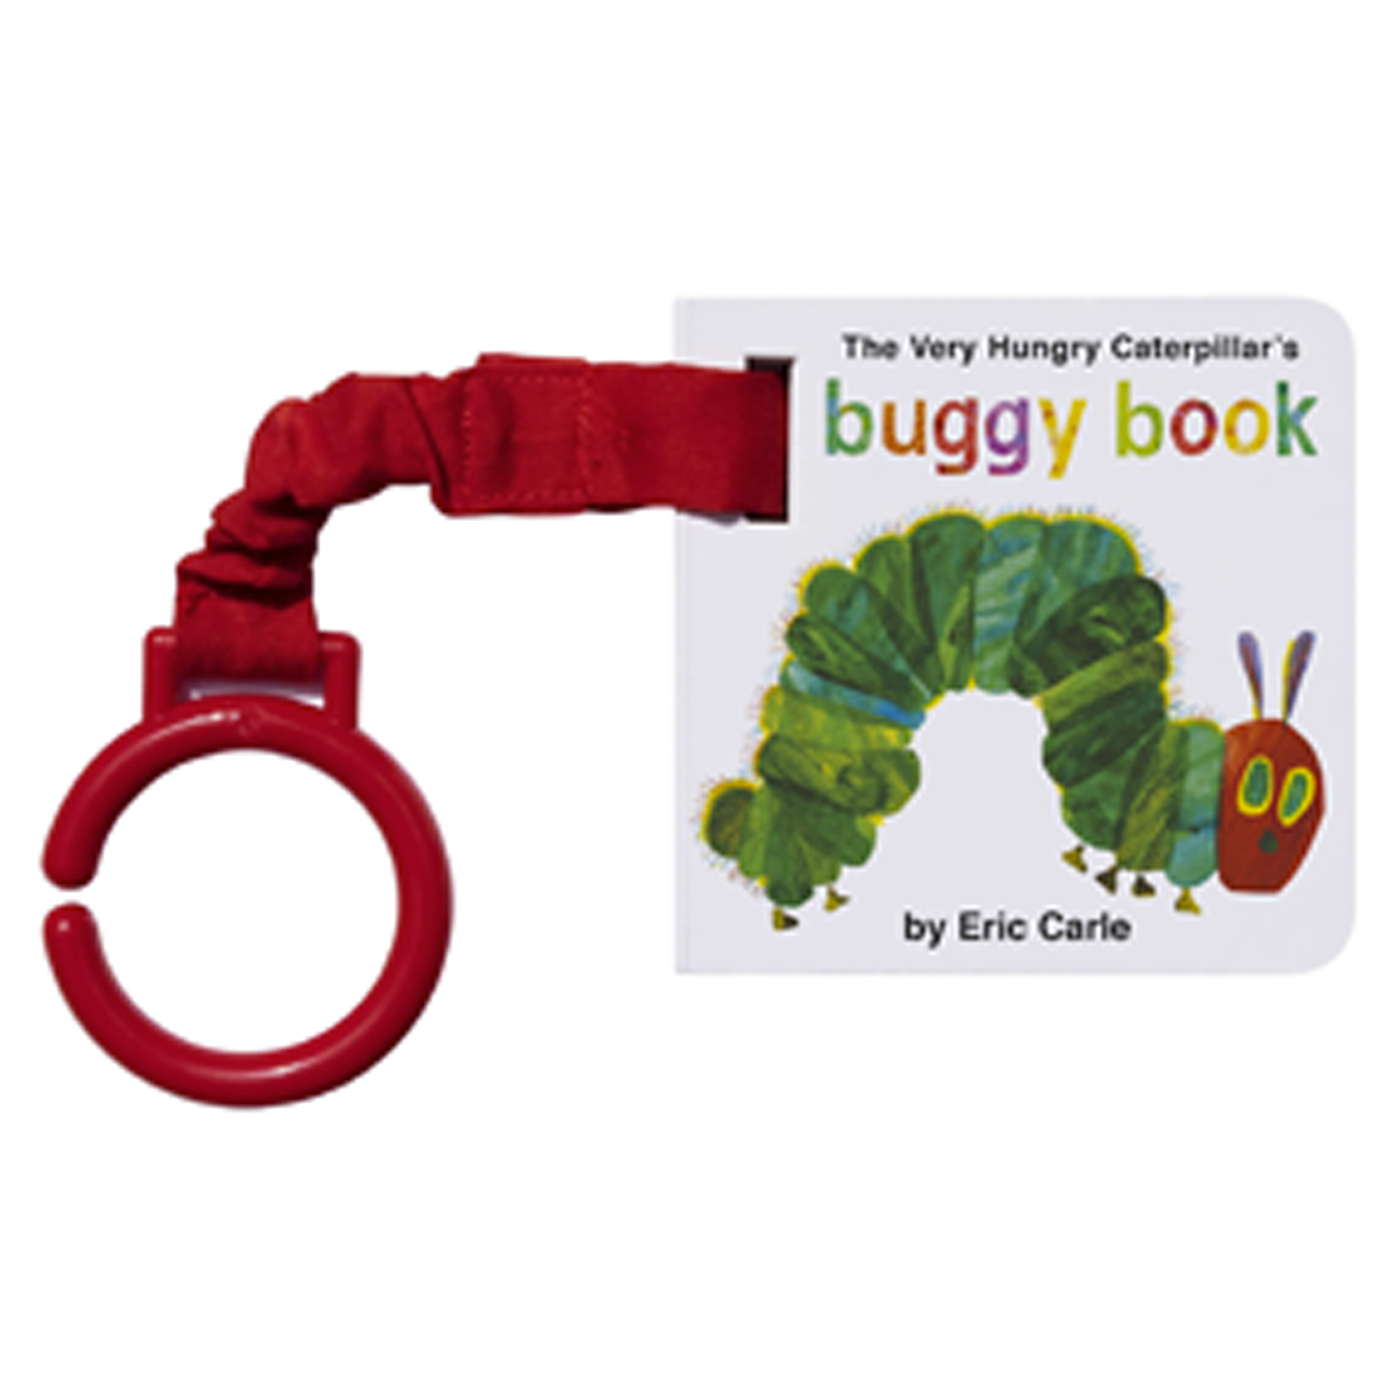  The Very Hungry Caterpillars Buggy Book